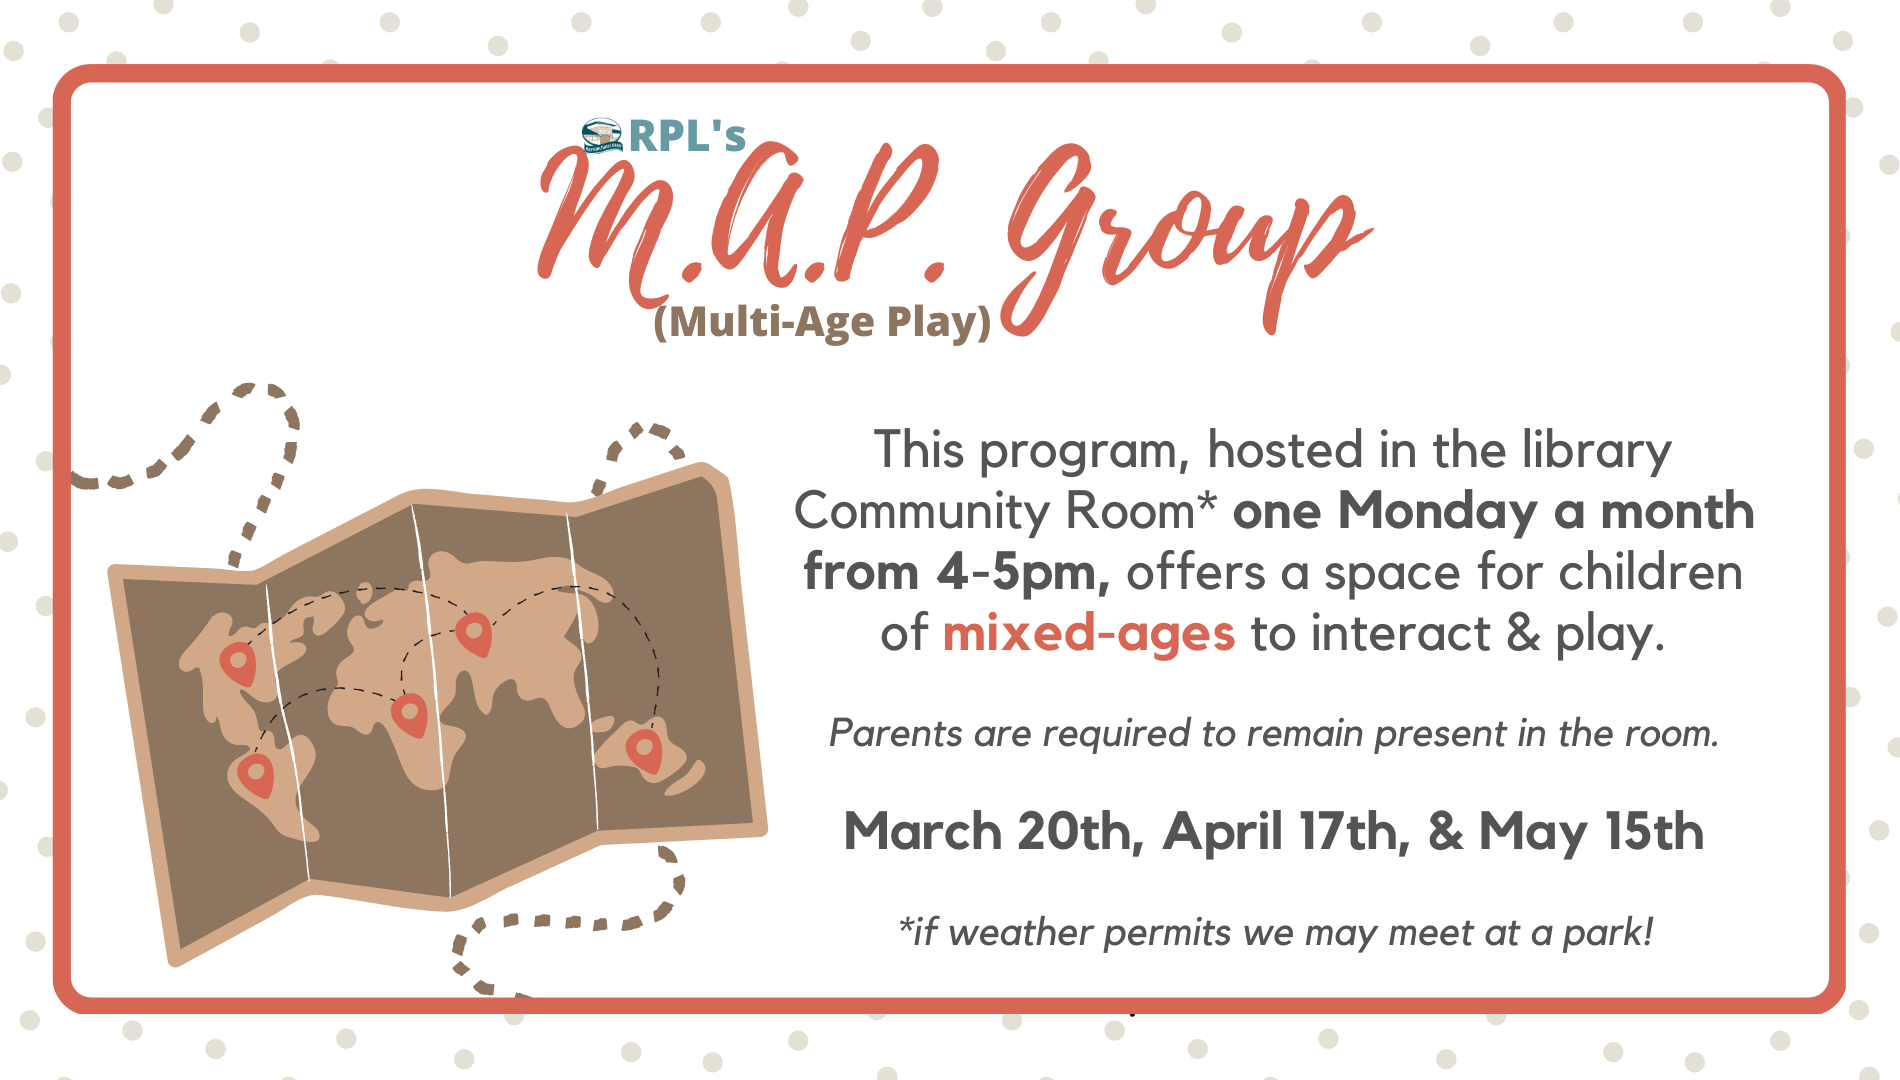 MAP, or Multi-age Play Group meets one Monday a month from 4-5pm